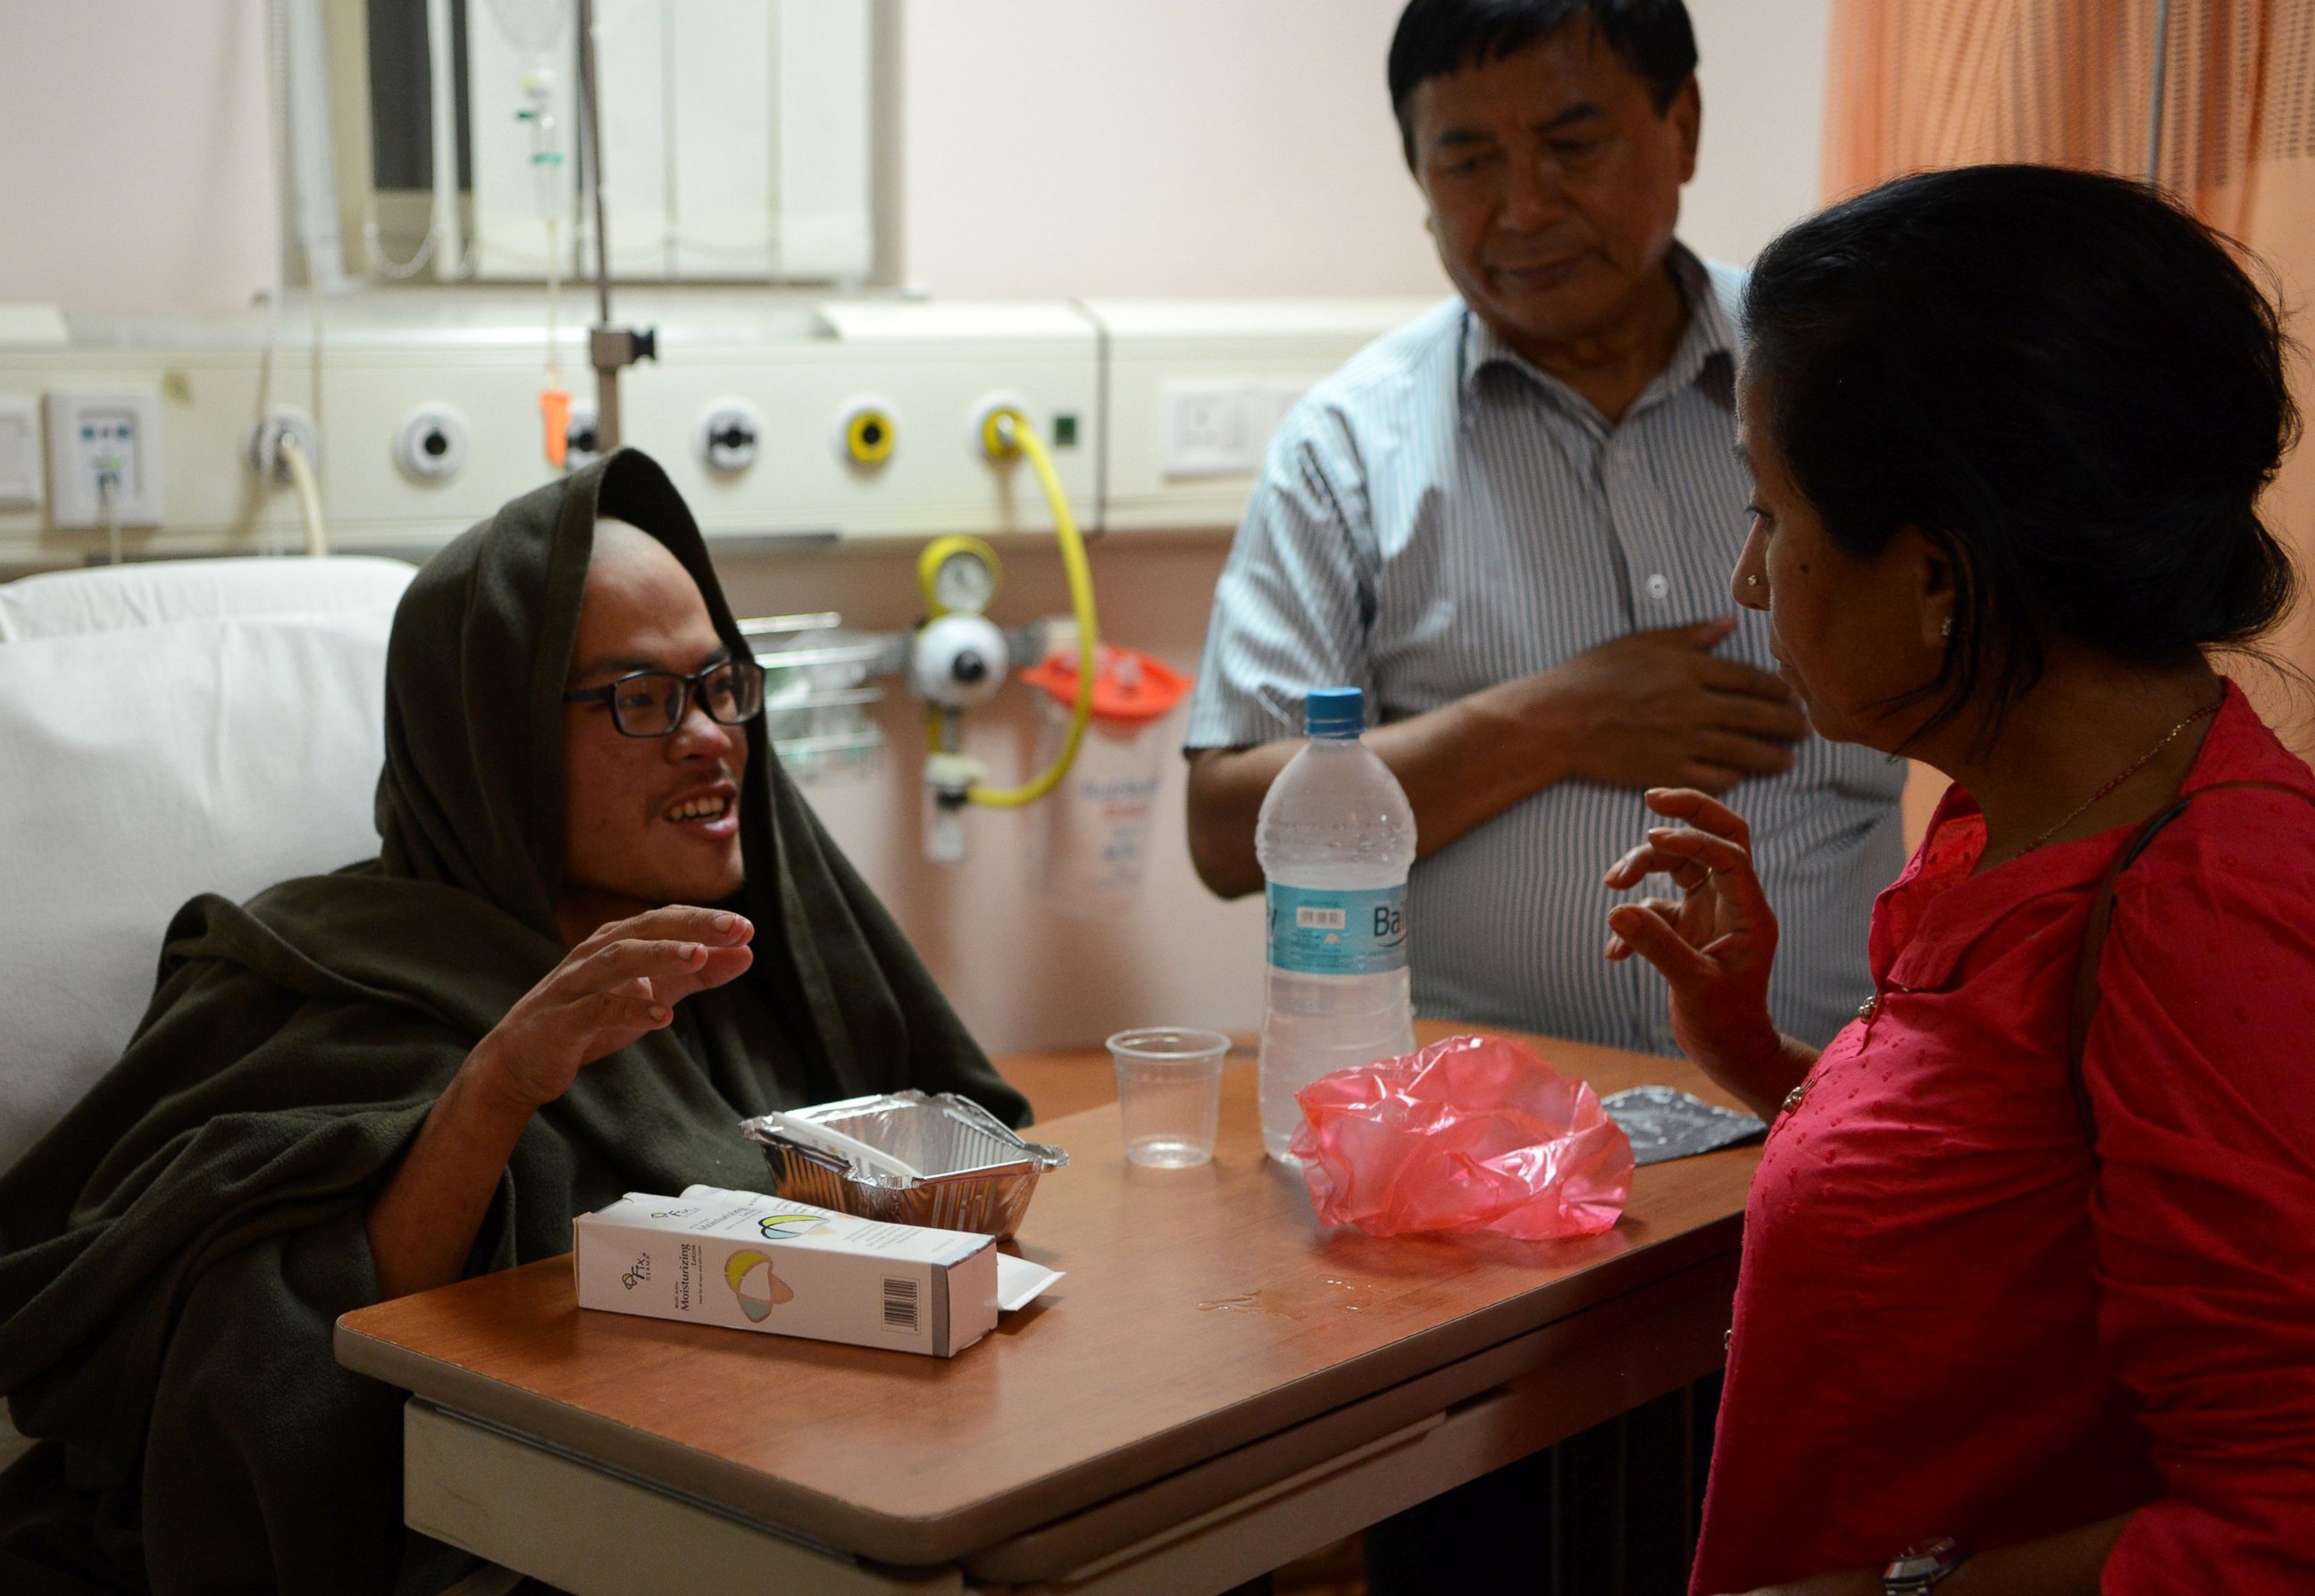 PHOTO: Taiwanese trekker Liang Sheng-yueh, who was rescued alive after being stranded in the Himalayas for 47 days, talks with a nutritionist in a hospital in Kathmandu, April 26, 2017.